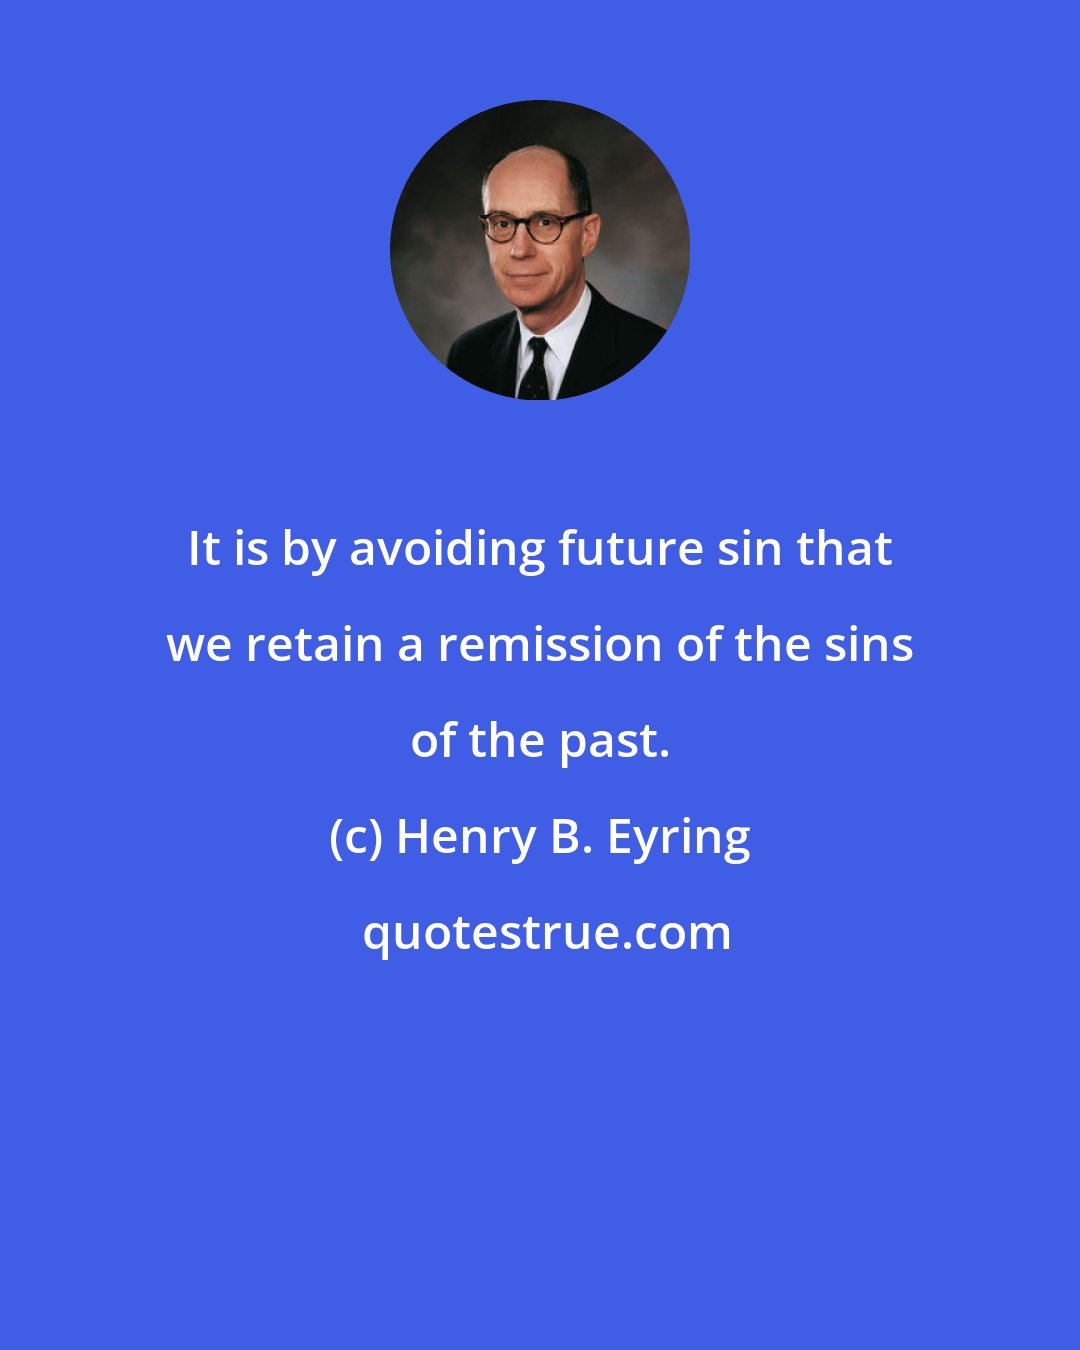 Henry B. Eyring: It is by avoiding future sin that we retain a remission of the sins of the past.